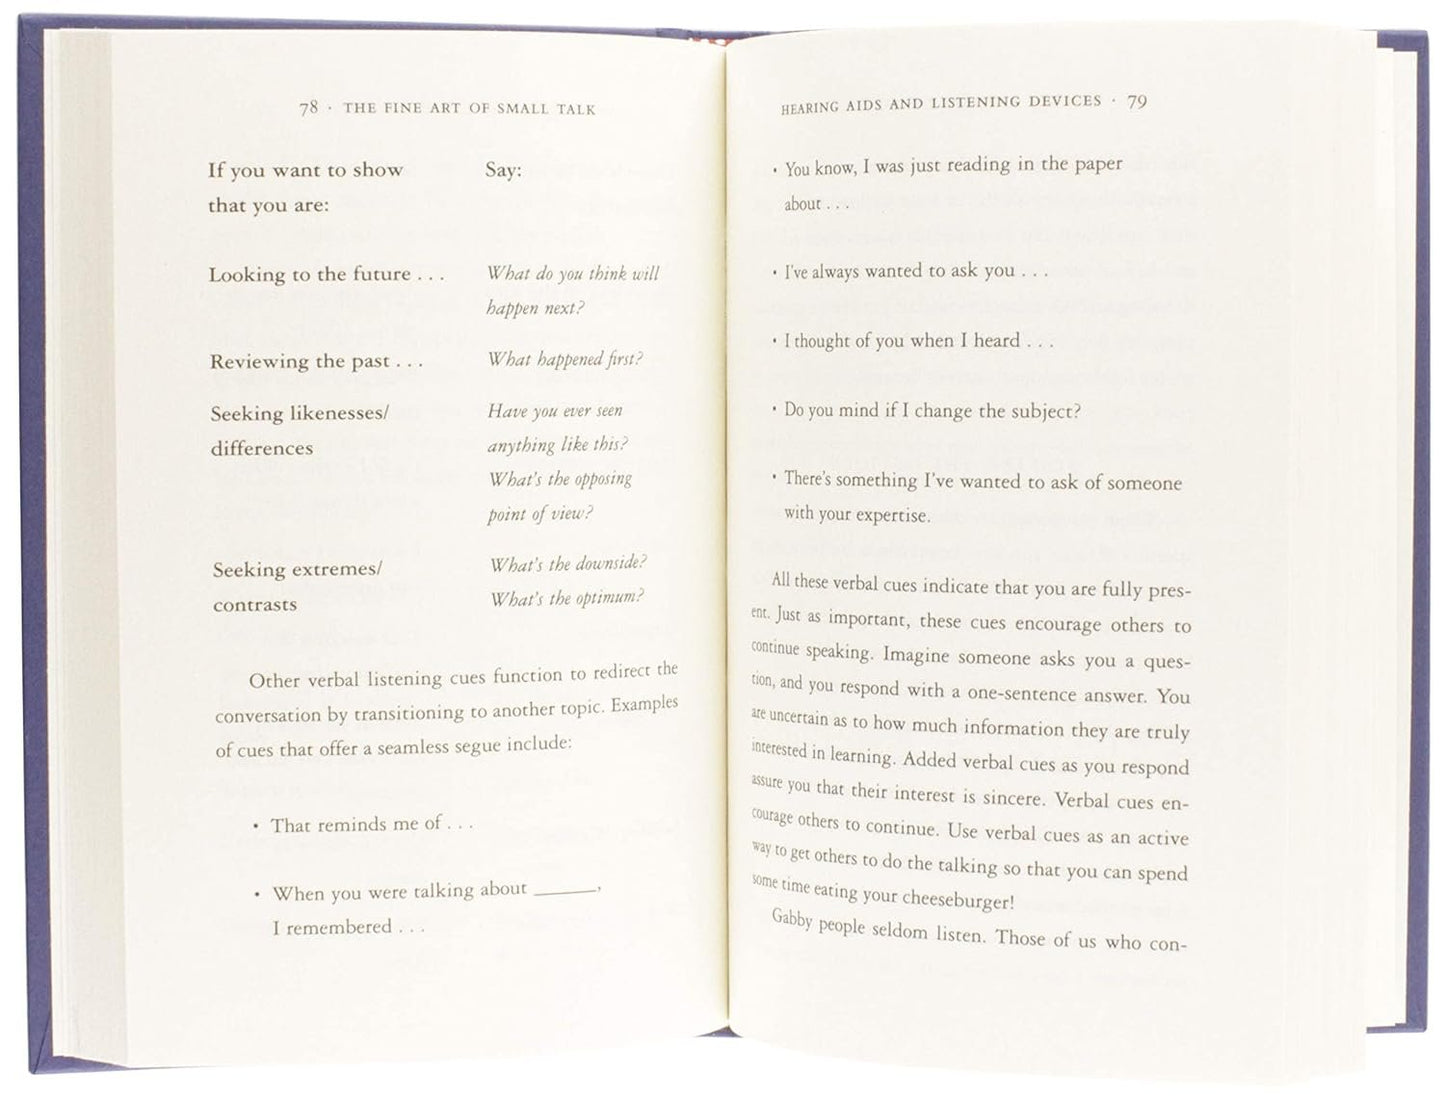 An open book displaying two pages of text with headings "The Fine Art of Small Talk: How To Start a Conversation, Keep It Going, Build Networking Skills -- and Leave a Positive Impression!" and "Hearing and Listening Devices" respectively, with various conversational tips listed underneath. 
Brand Name: by Debra Fine (Author)